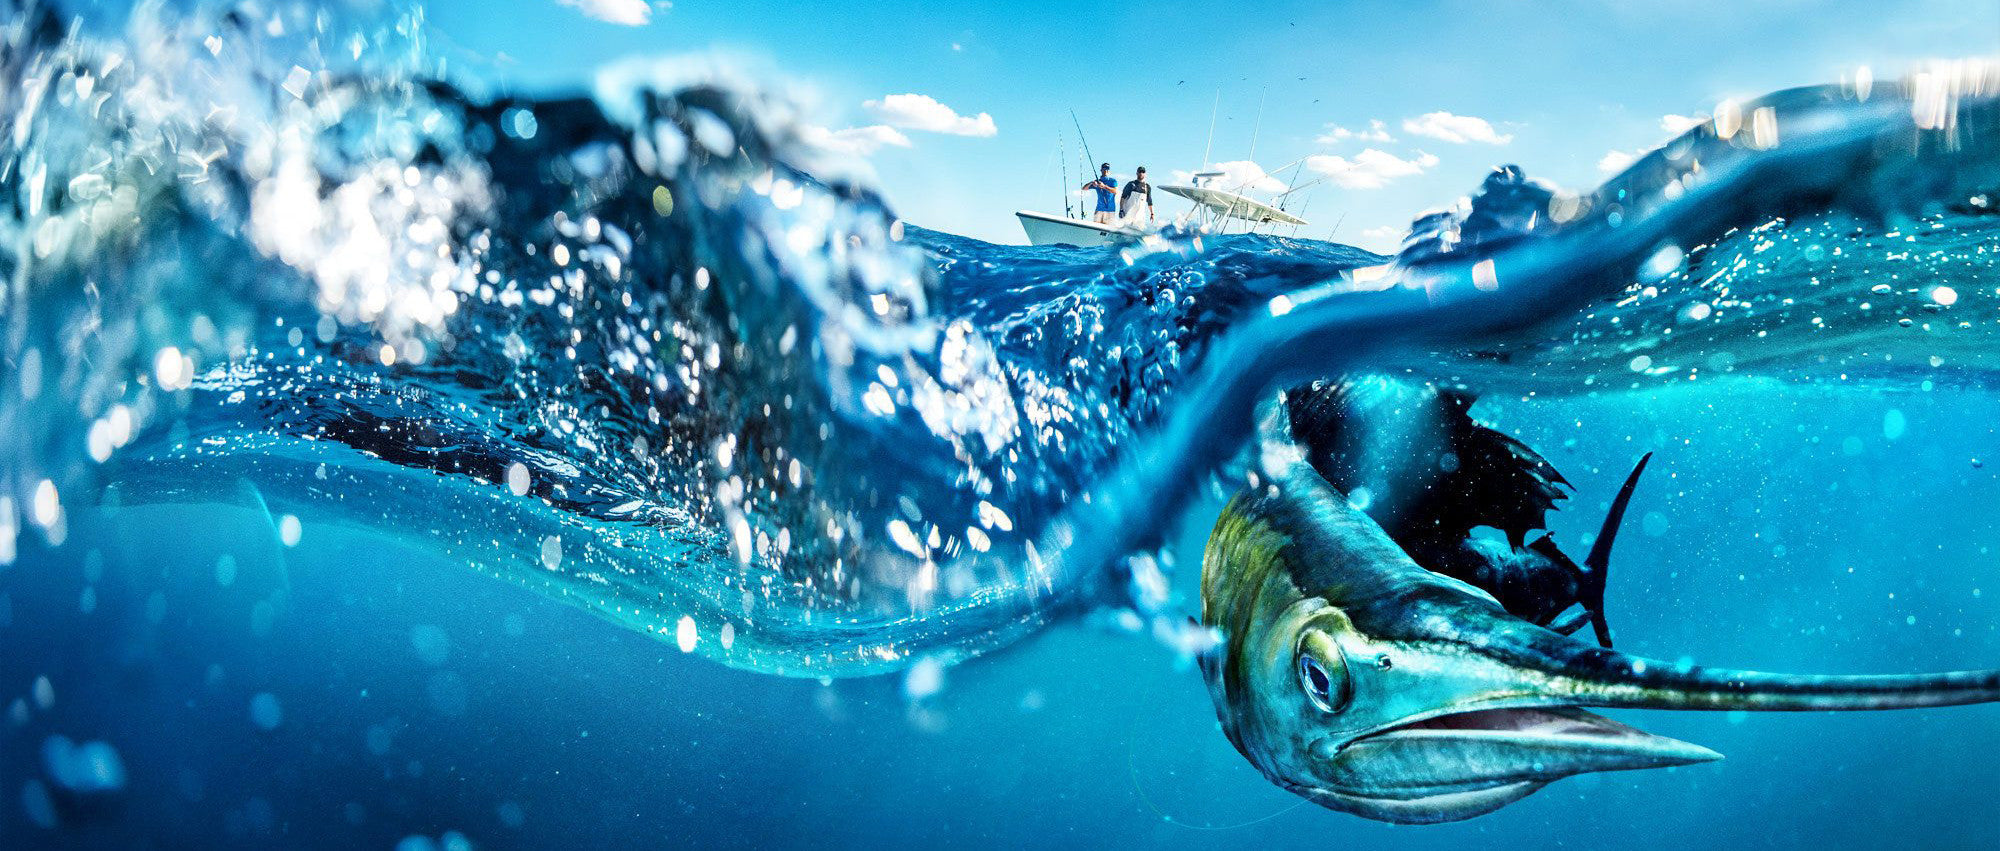 Underwater camera for luxury yachts, fishing boats. Sea what lies under your boat